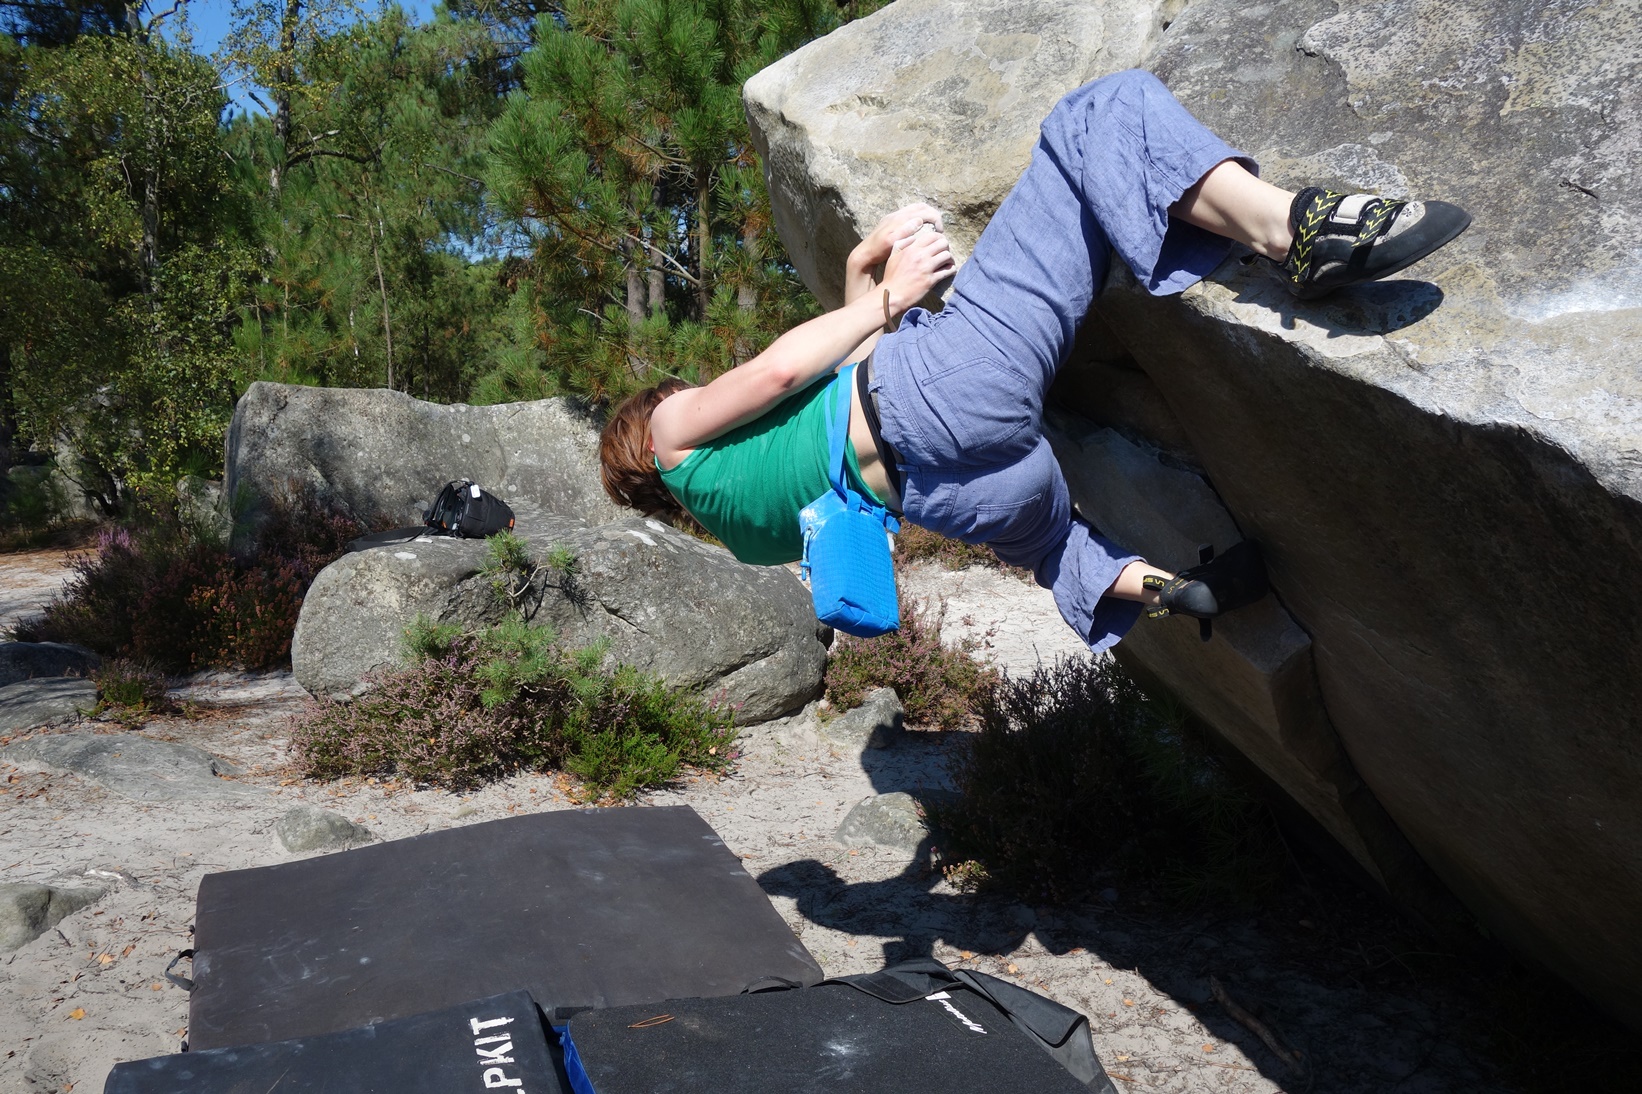 Debs gets ready to top out in style on an unnamed problem at 95.2